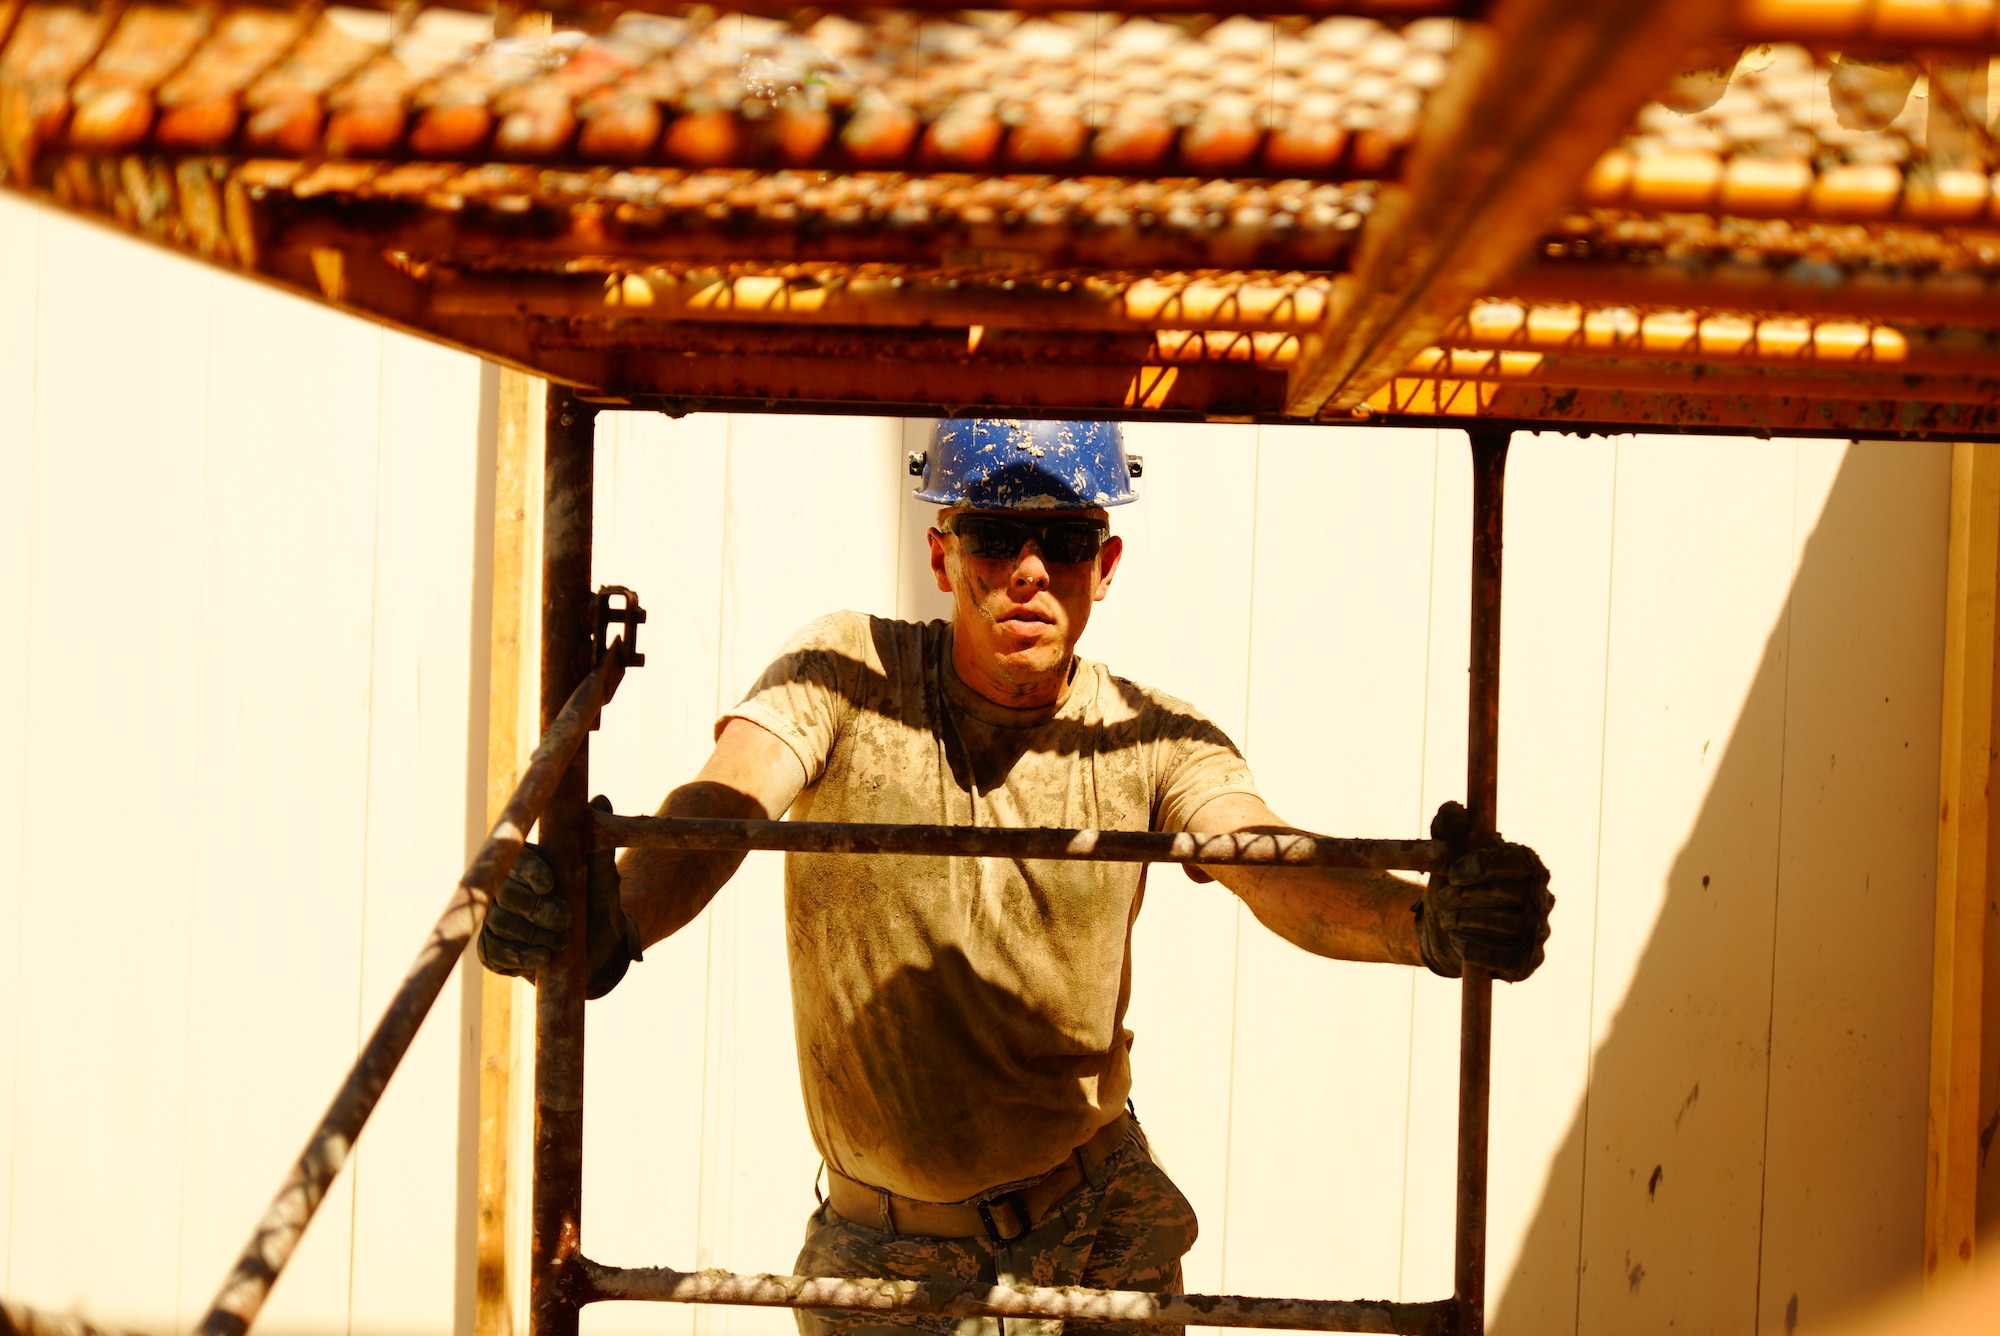 Staff Sgt. Daniel Plourde with the HVAC section prepares to move scaffold for the crews pouring cement overhead July 23, 2015, at Hatzor Air Base, Israel, in support of Operation JUNIPER COBRA . (U.S. Air National Guard photos by Master Sgt. Robert Armstrong)